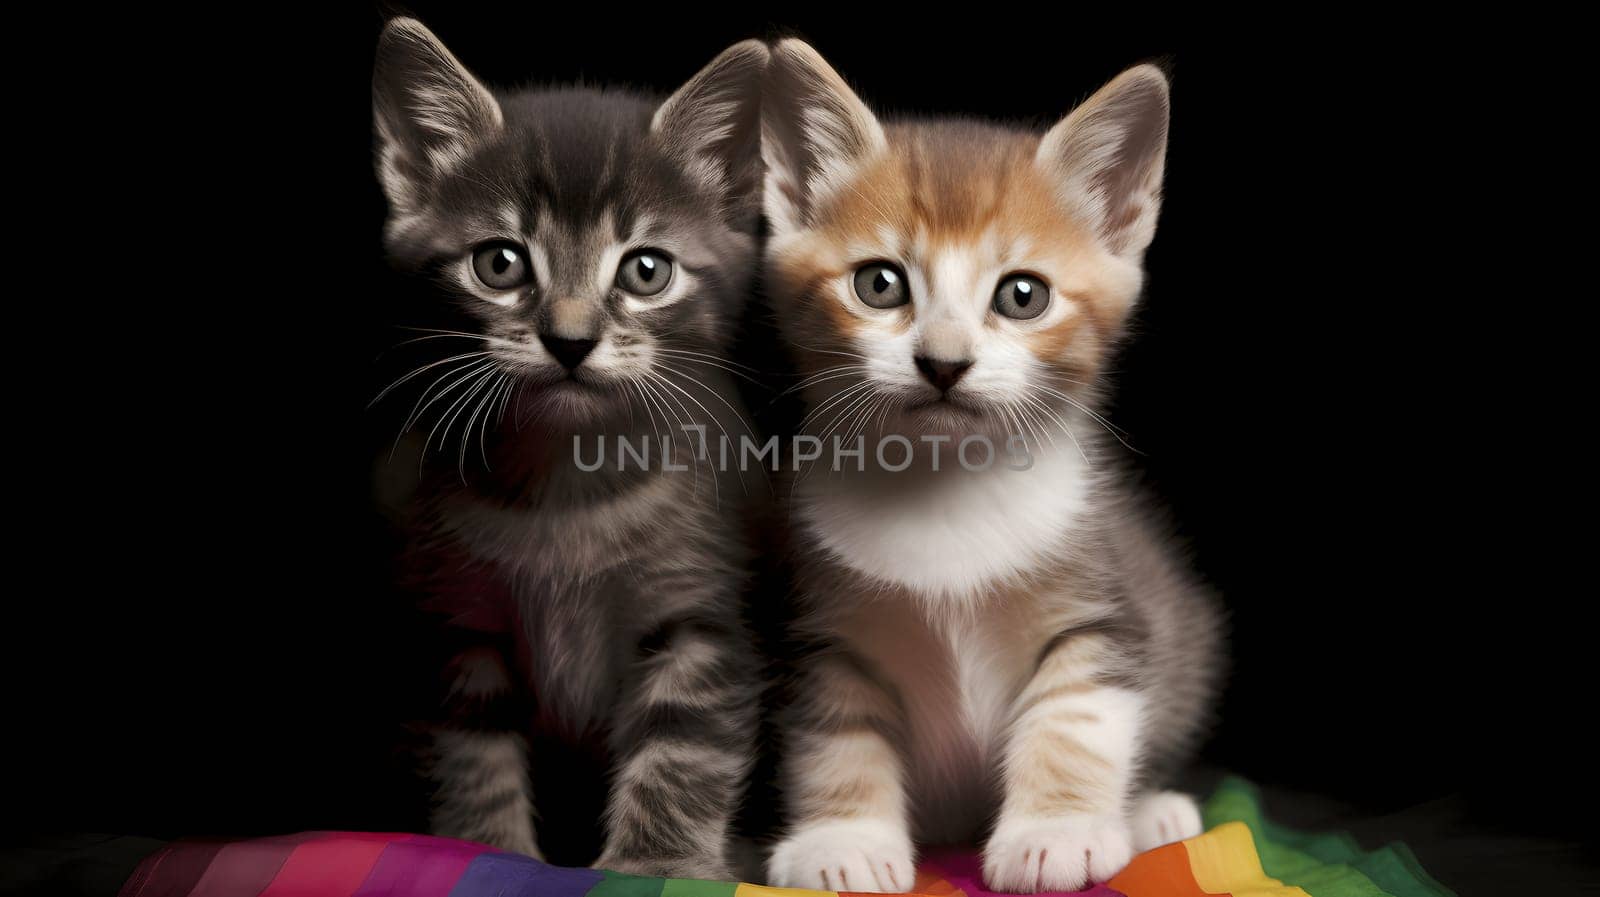 pair of kittens on rainbow LGBT flag, neural network generated image by z1b